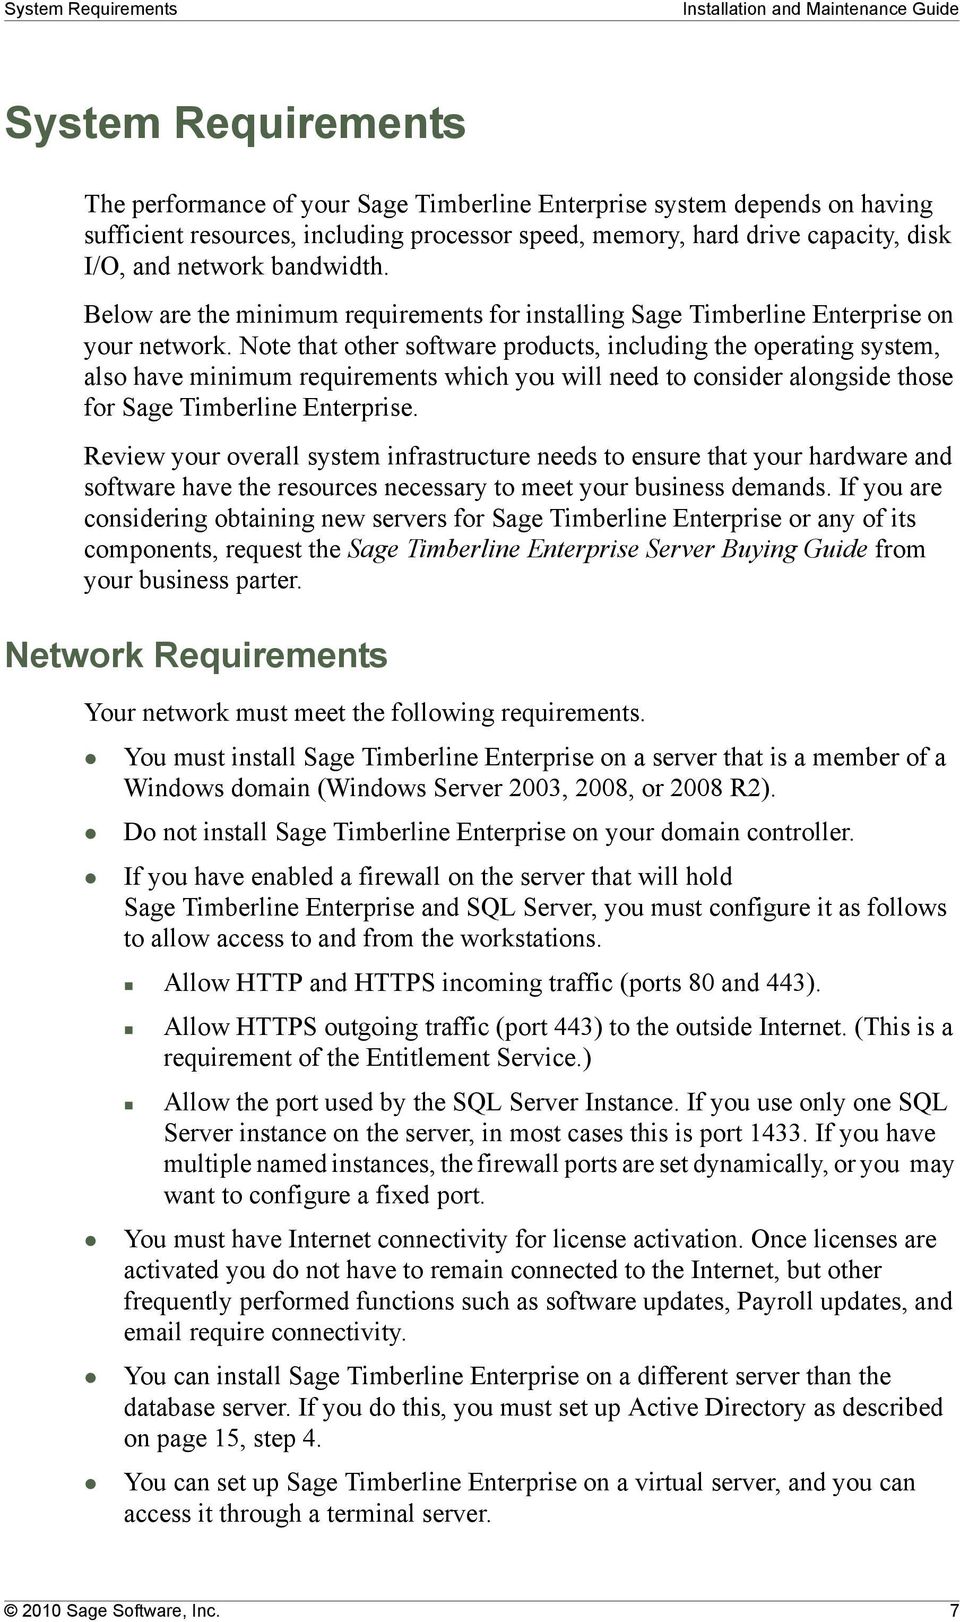 Note that other software products, including the operating system, also have minimum requirements which you will need to consider alongside those for Sage Timberline Enterprise.